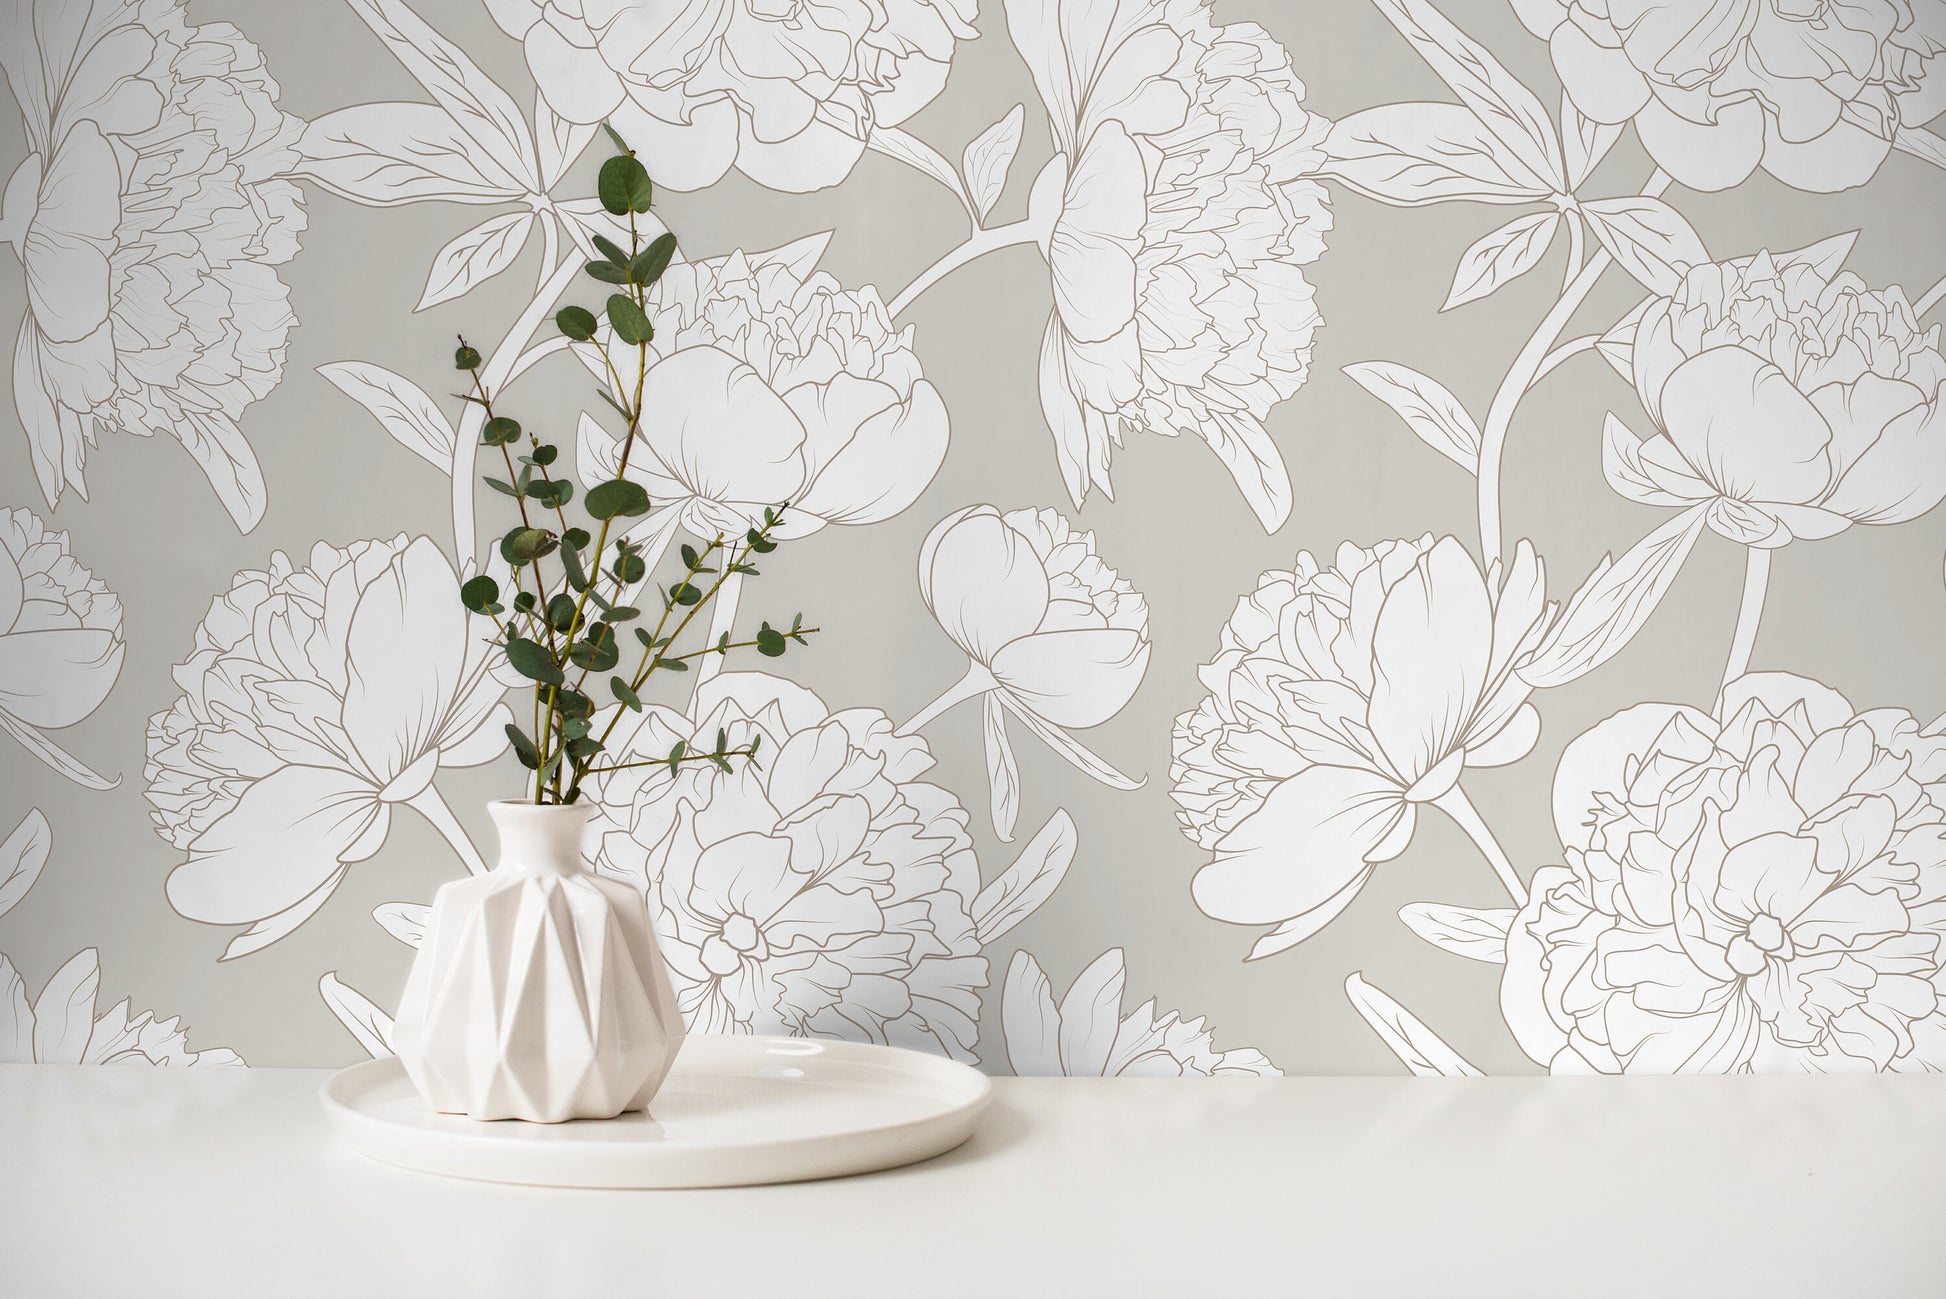 Light Boho Peony Wallpaper Peel and Stick Removable Repositionable Large Floral Minimalistic Abstract - ZAAK